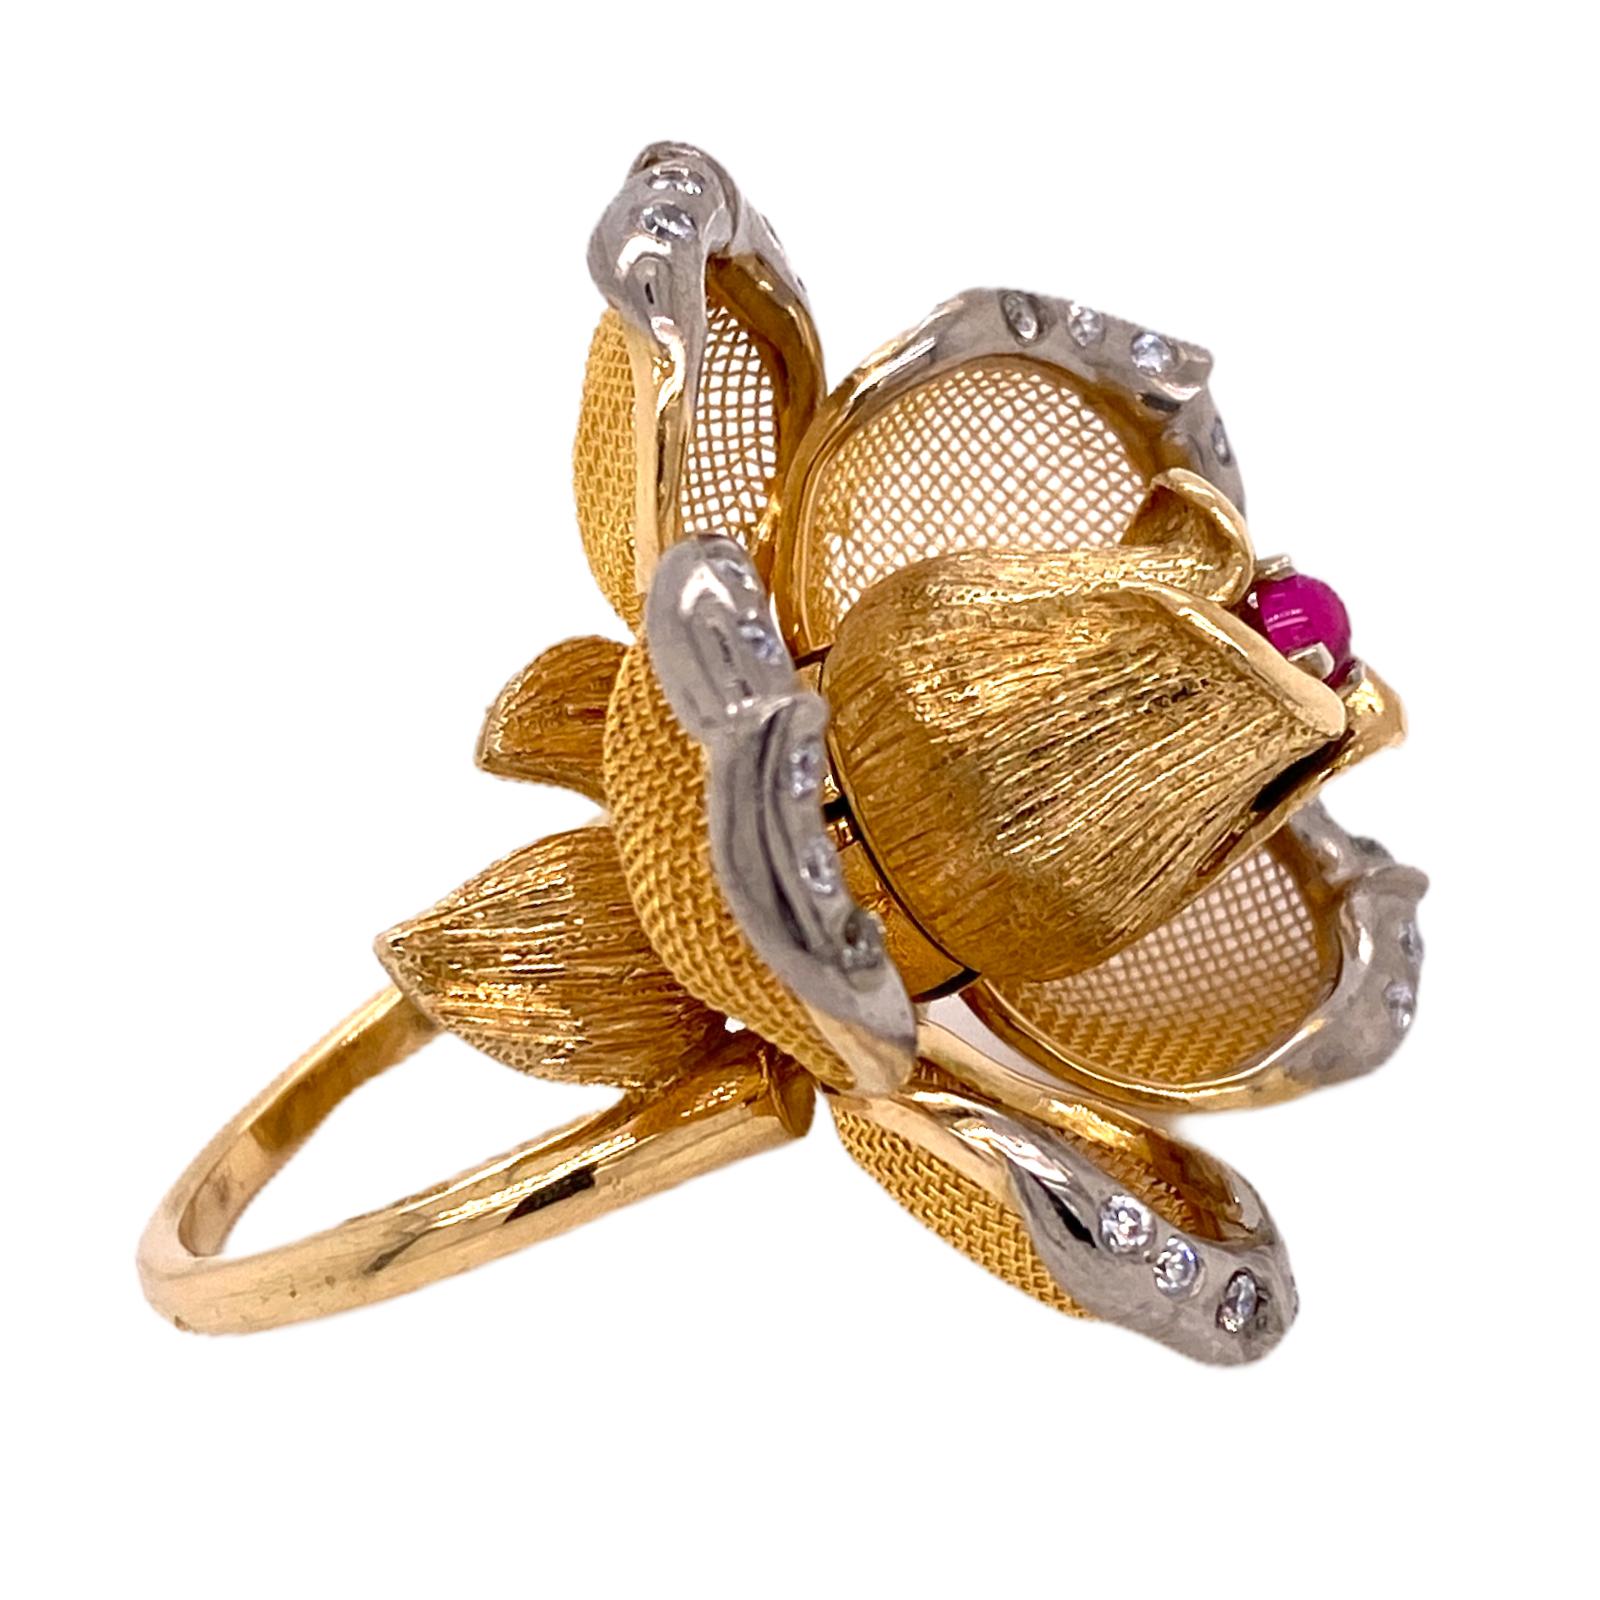 Fabulous French flower ring fashioned in 18 karat yellow gold. The petals open and close, and feature 25 round brilliant cut diamonds weighing .25 carat total weight. The single cabochon ruby is set in the center of mesh gold petals. When open, the